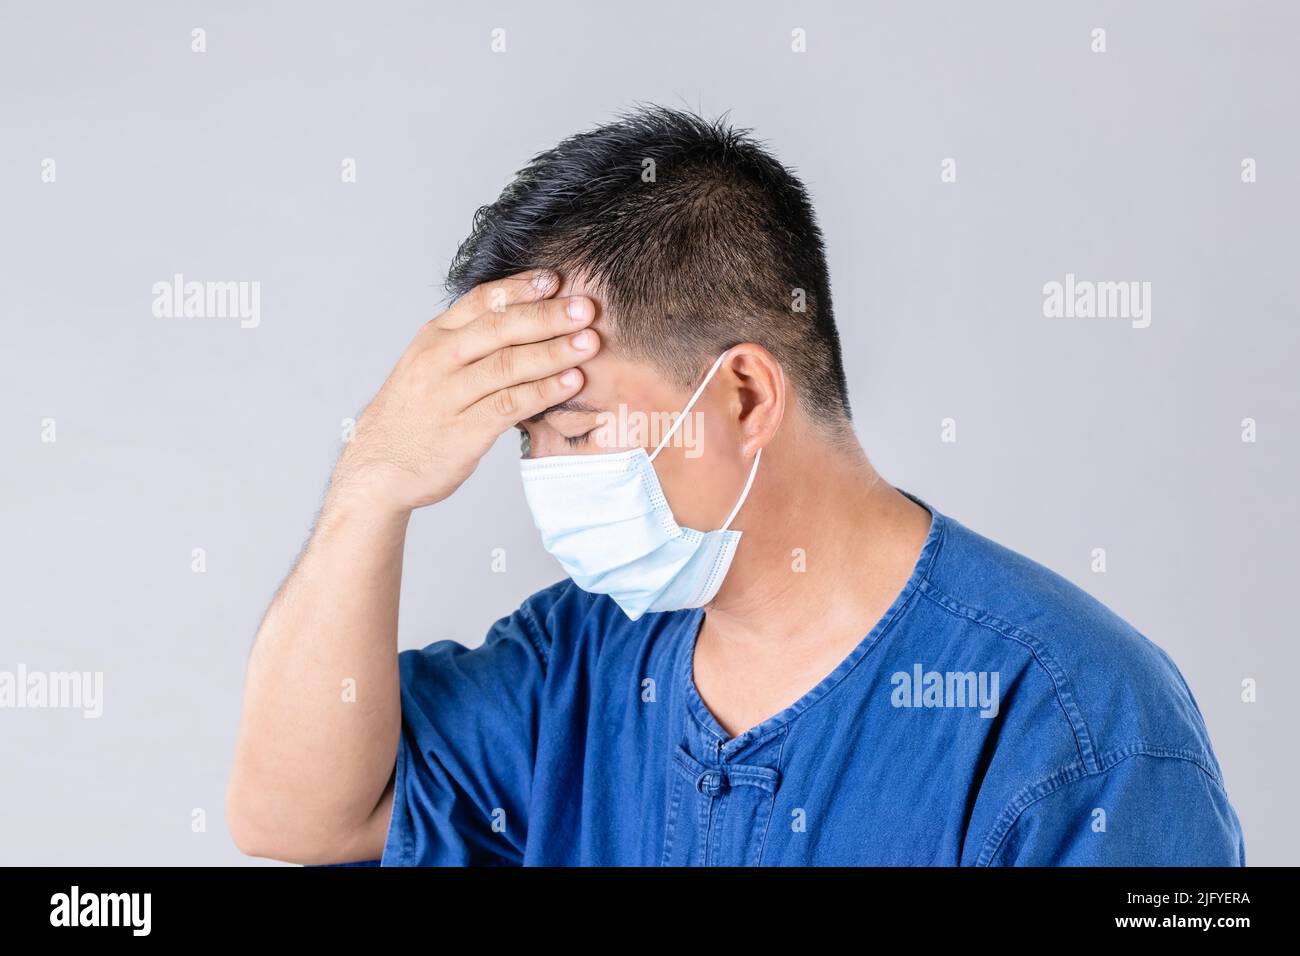 Portrait of Thai farmer wearing protective face mask to prevent virus and touch on head studio shot on grey background Stock Photo